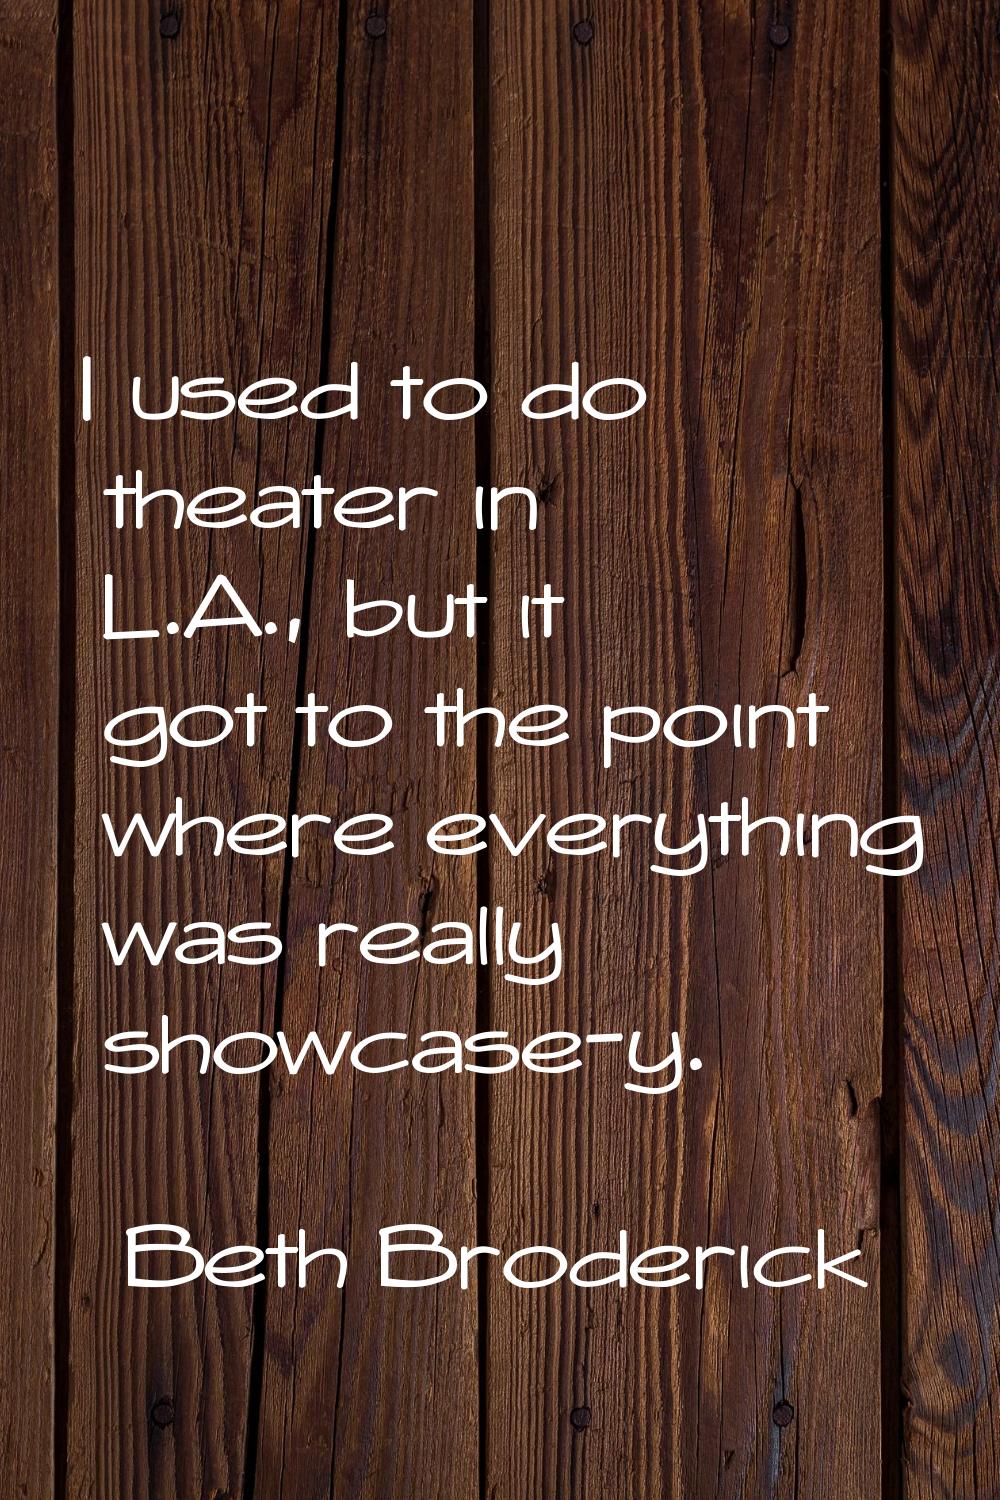 I used to do theater in L.A., but it got to the point where everything was really showcase-y.